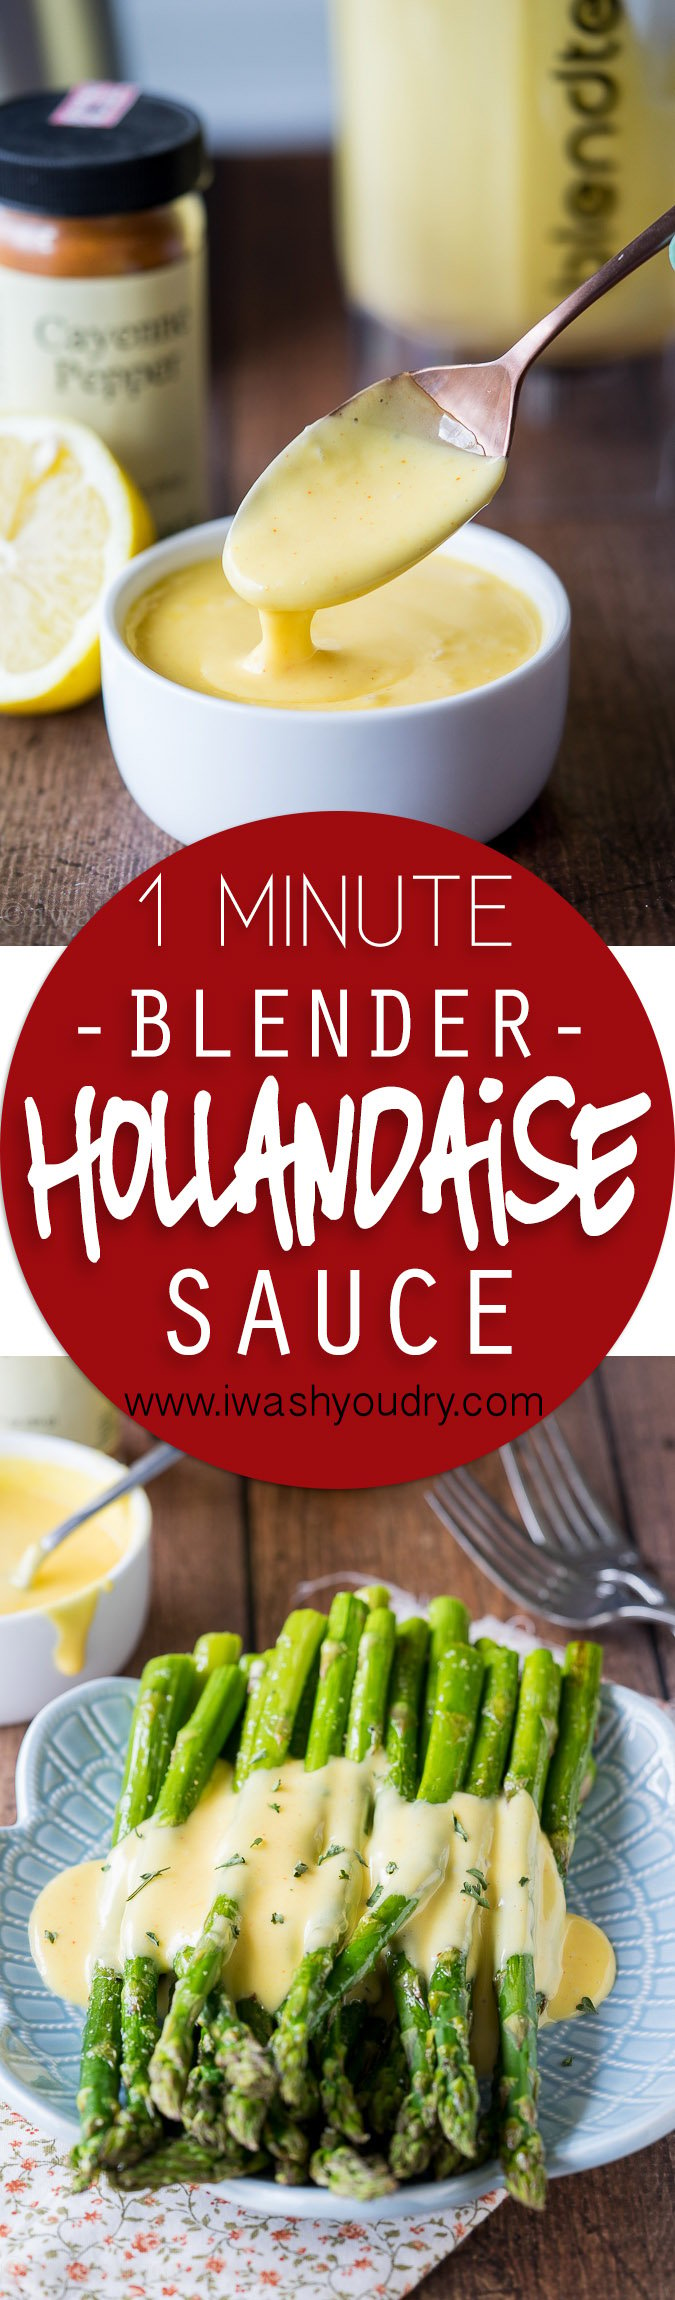 Oh my gosh! Ever since I've made this Easy Blender Hollandaise Sauce Roasted Asparagus, I can not stop thinking about it! It's so easy and turns an ordinary meal into something fancy and delicious!